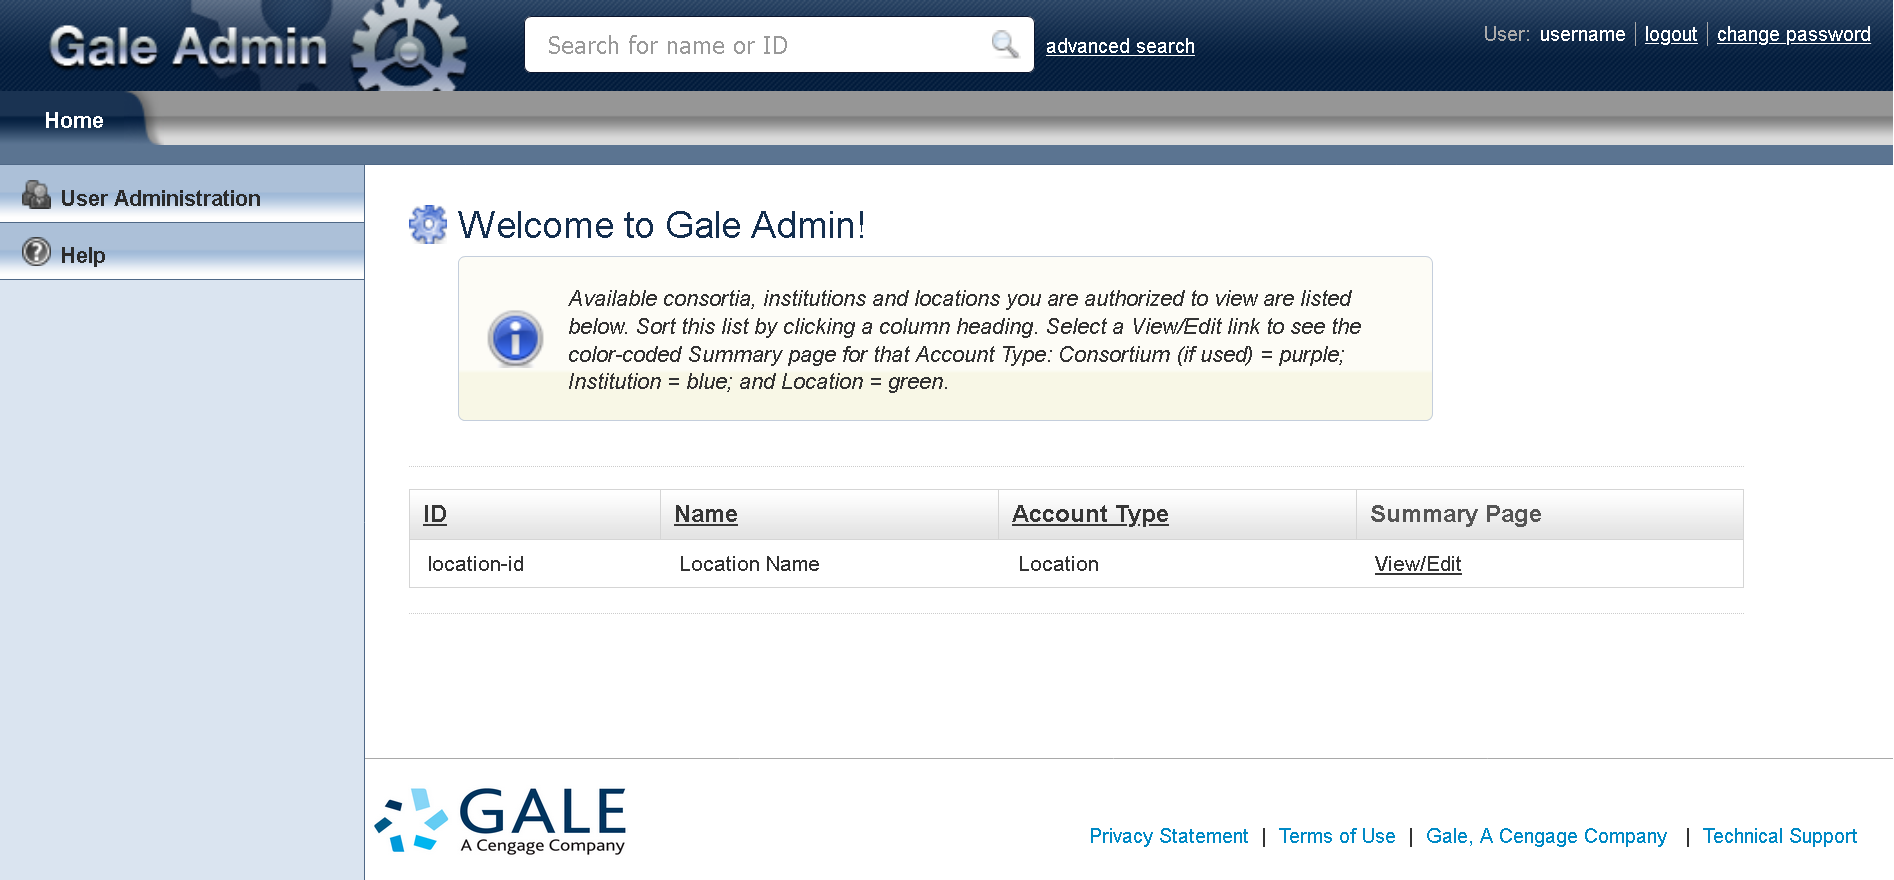 Gale Admin - Home Page